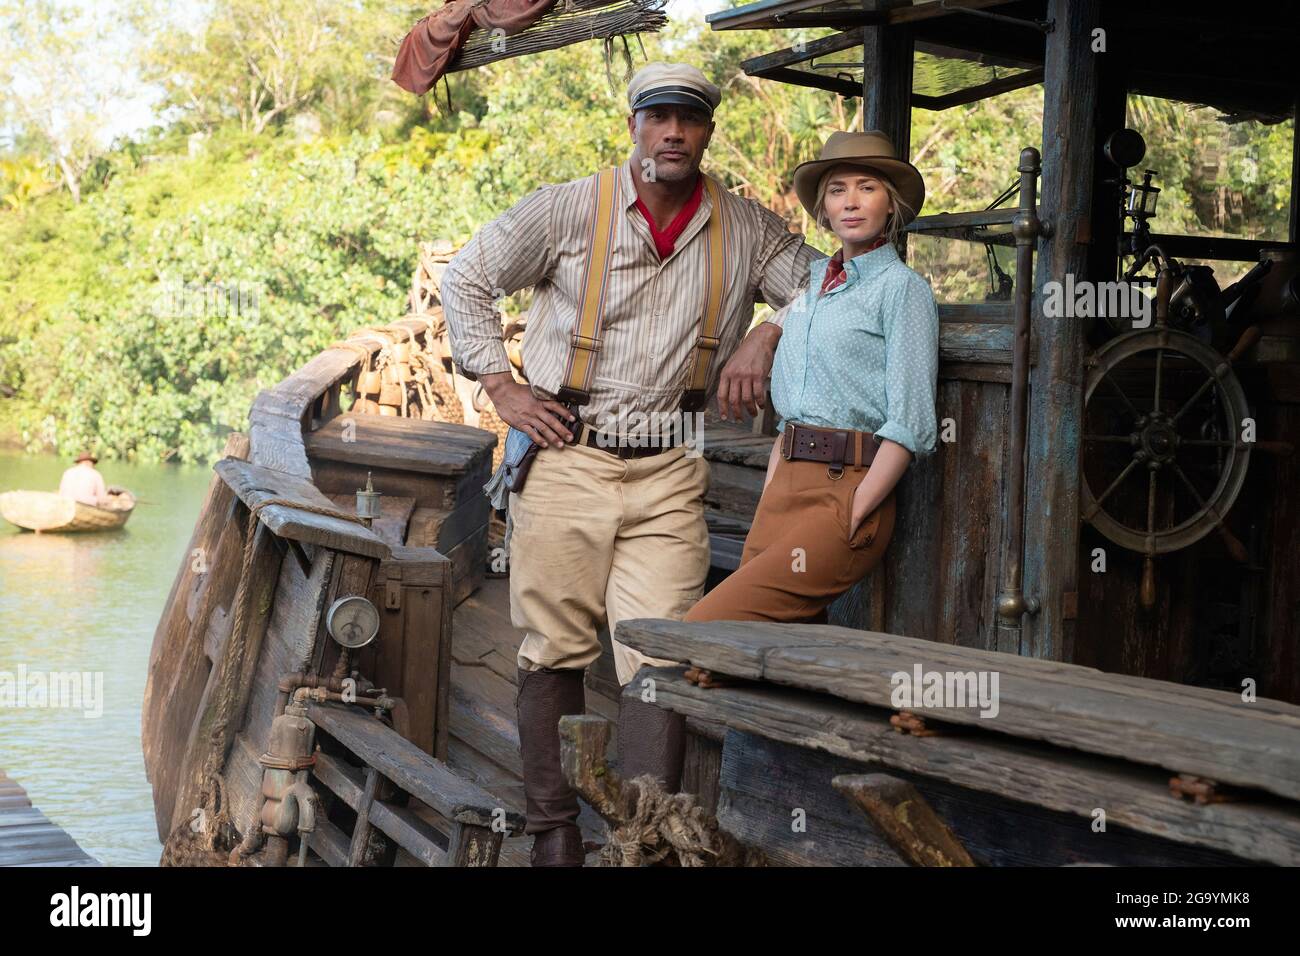 Jungle Cruise (2020) directed by Jaume Collet-Serra and starring Dwayne Johnson as Frank and Emily Blunt as Lily Houghton on an adventure based on Disneyland's theme park ride about passengers on a perilous journey on a riverboat. Stock Photo